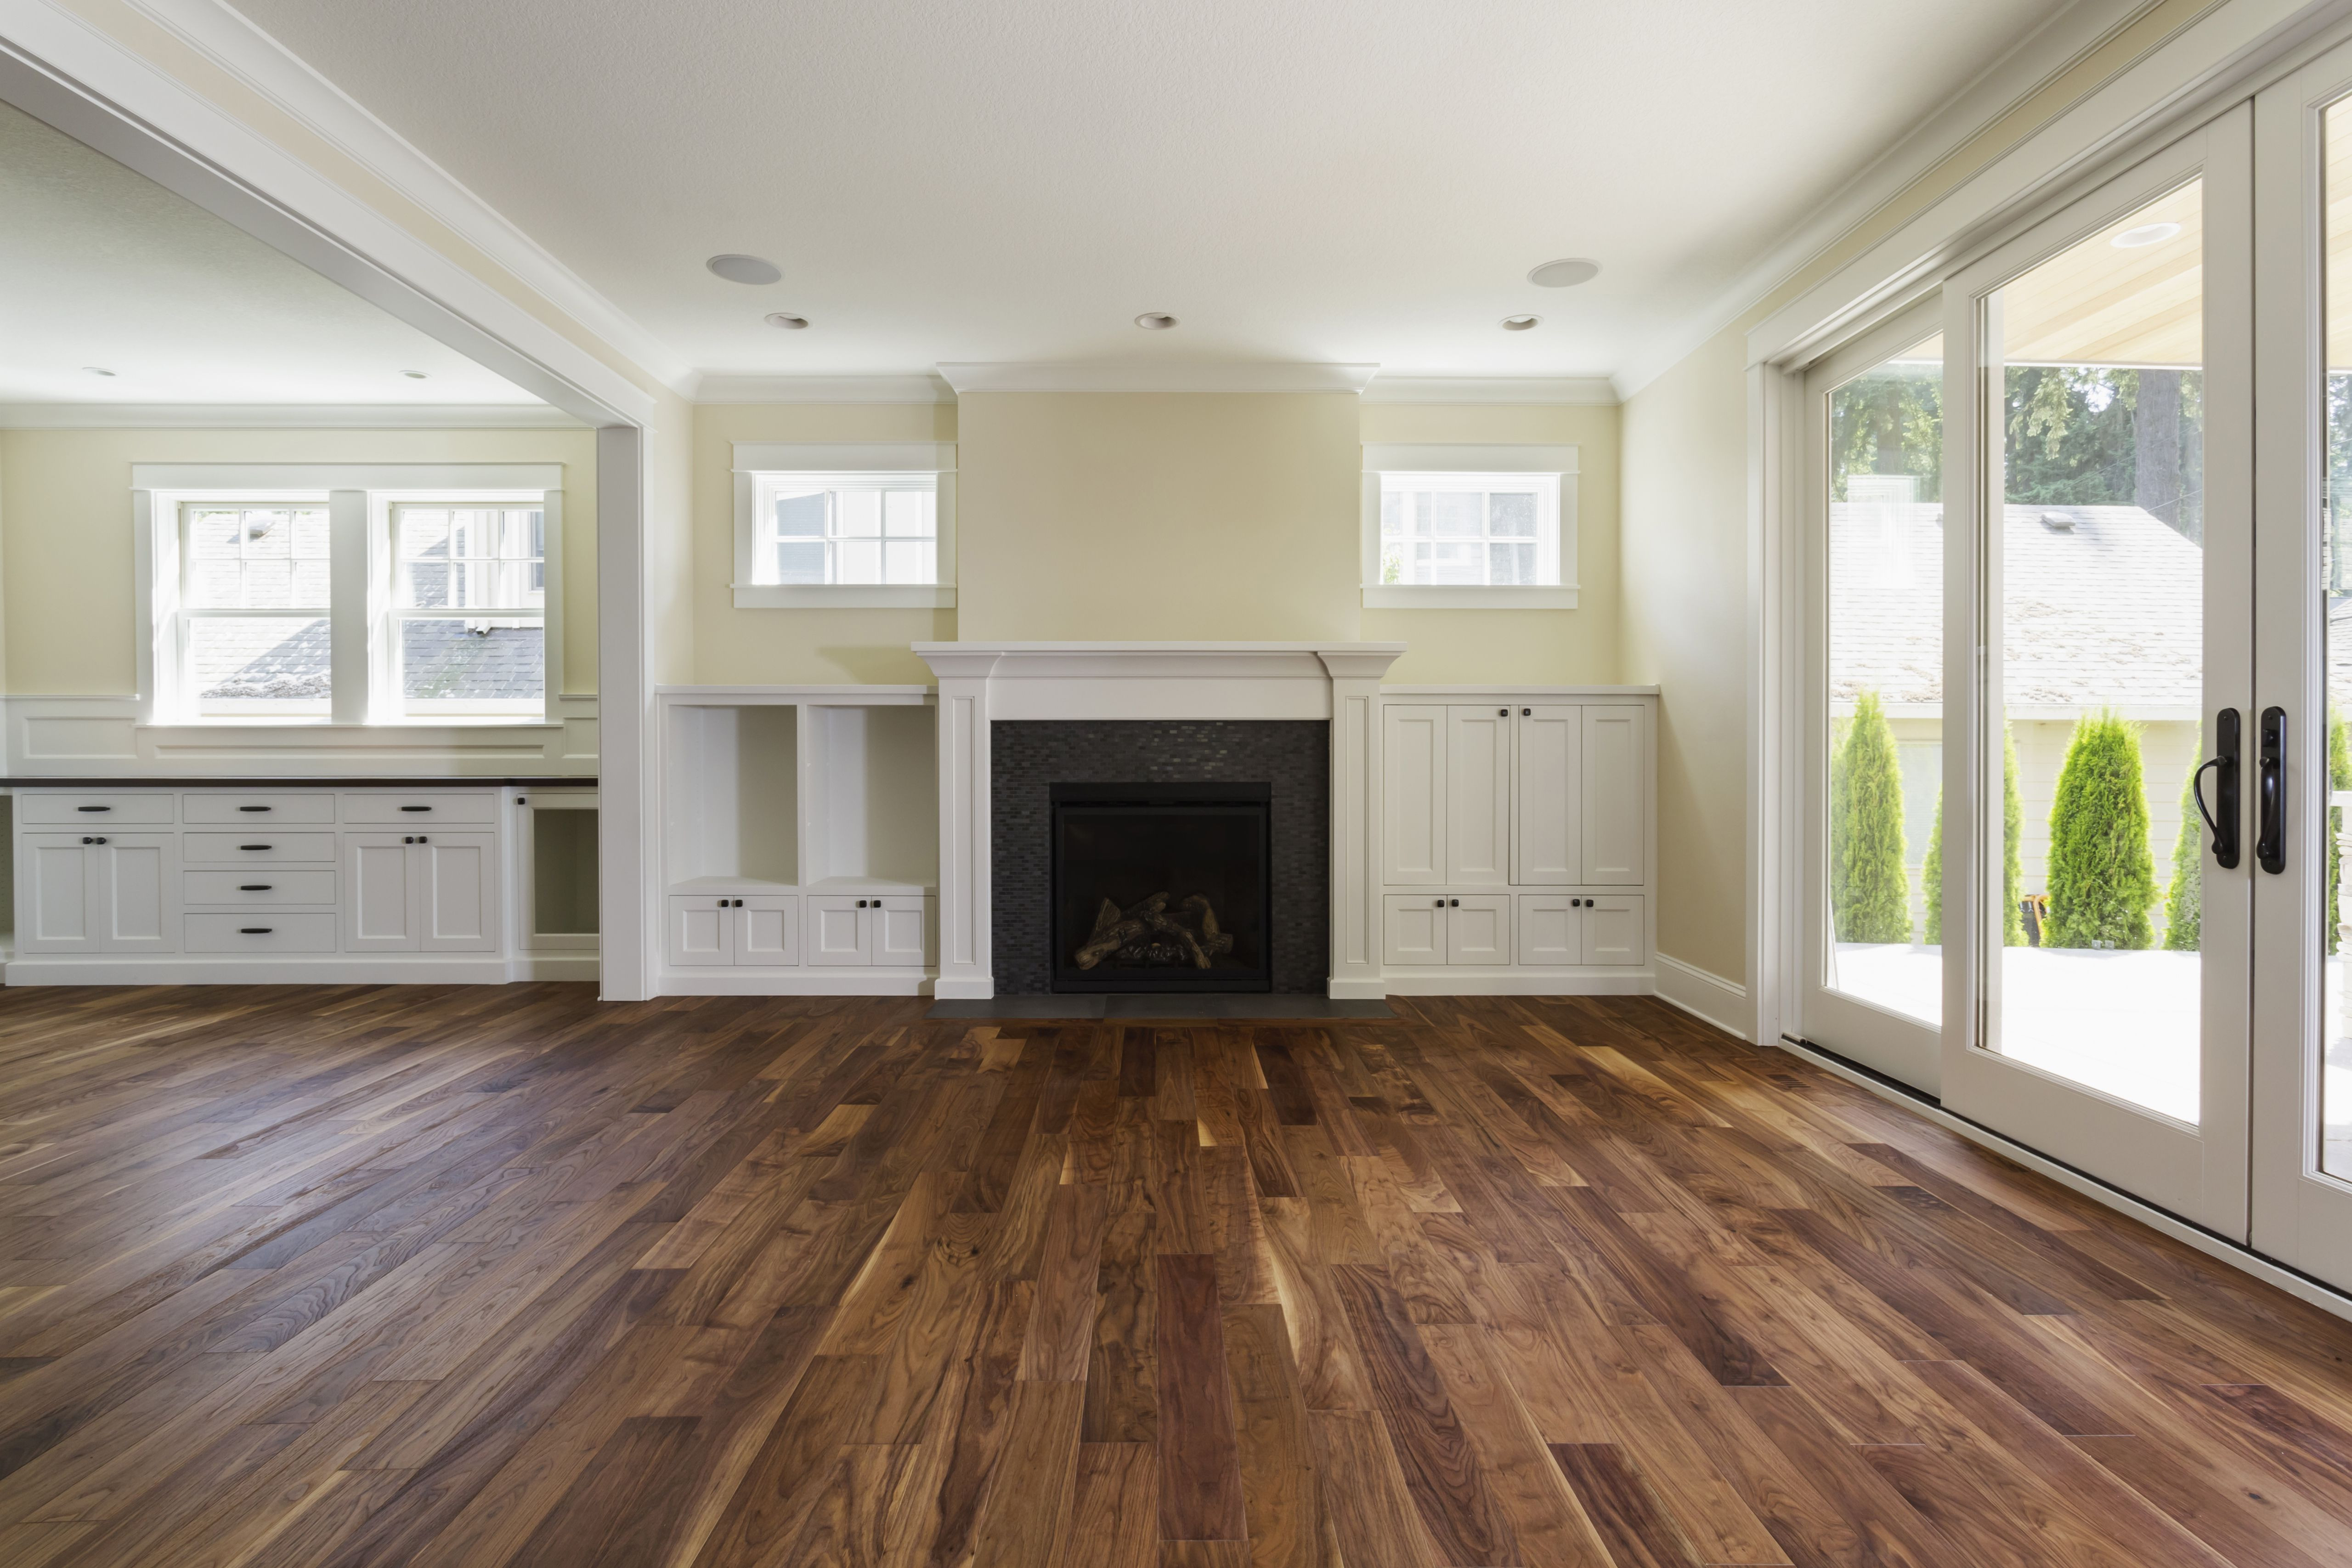 Hardwood Flooring Mills Near Me Of the Pros and Cons Of Prefinished Hardwood Flooring with Regard to Fireplace and Built In Shelves In Living Room 482143011 57bef8e33df78cc16e035397